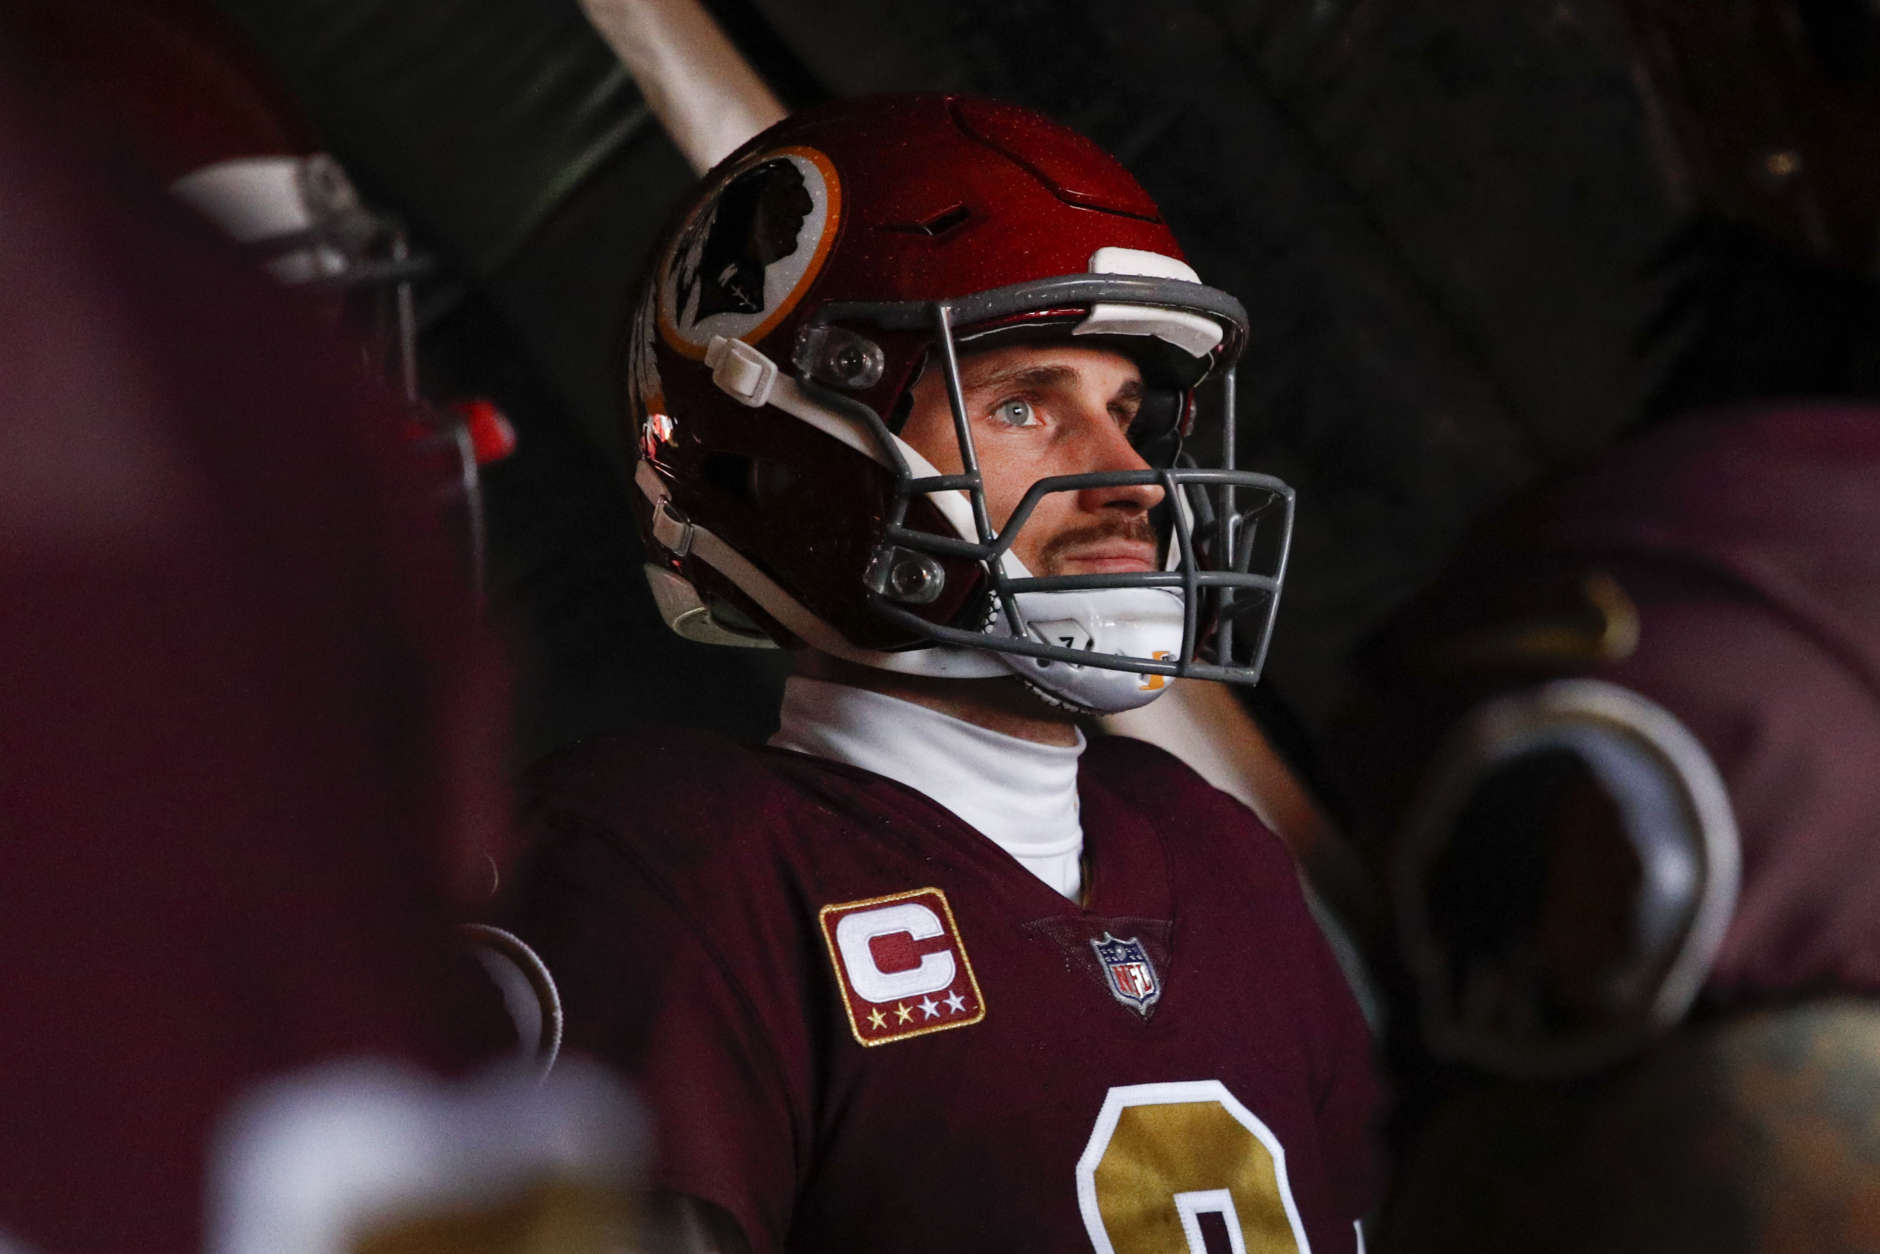 Former Washington quarterback Kirk Cousins, shown here in a 2017 file photo, will get paid in Minnesota: $28 million a year for 3 years. (AP Photo/Patrick Semansky, file)